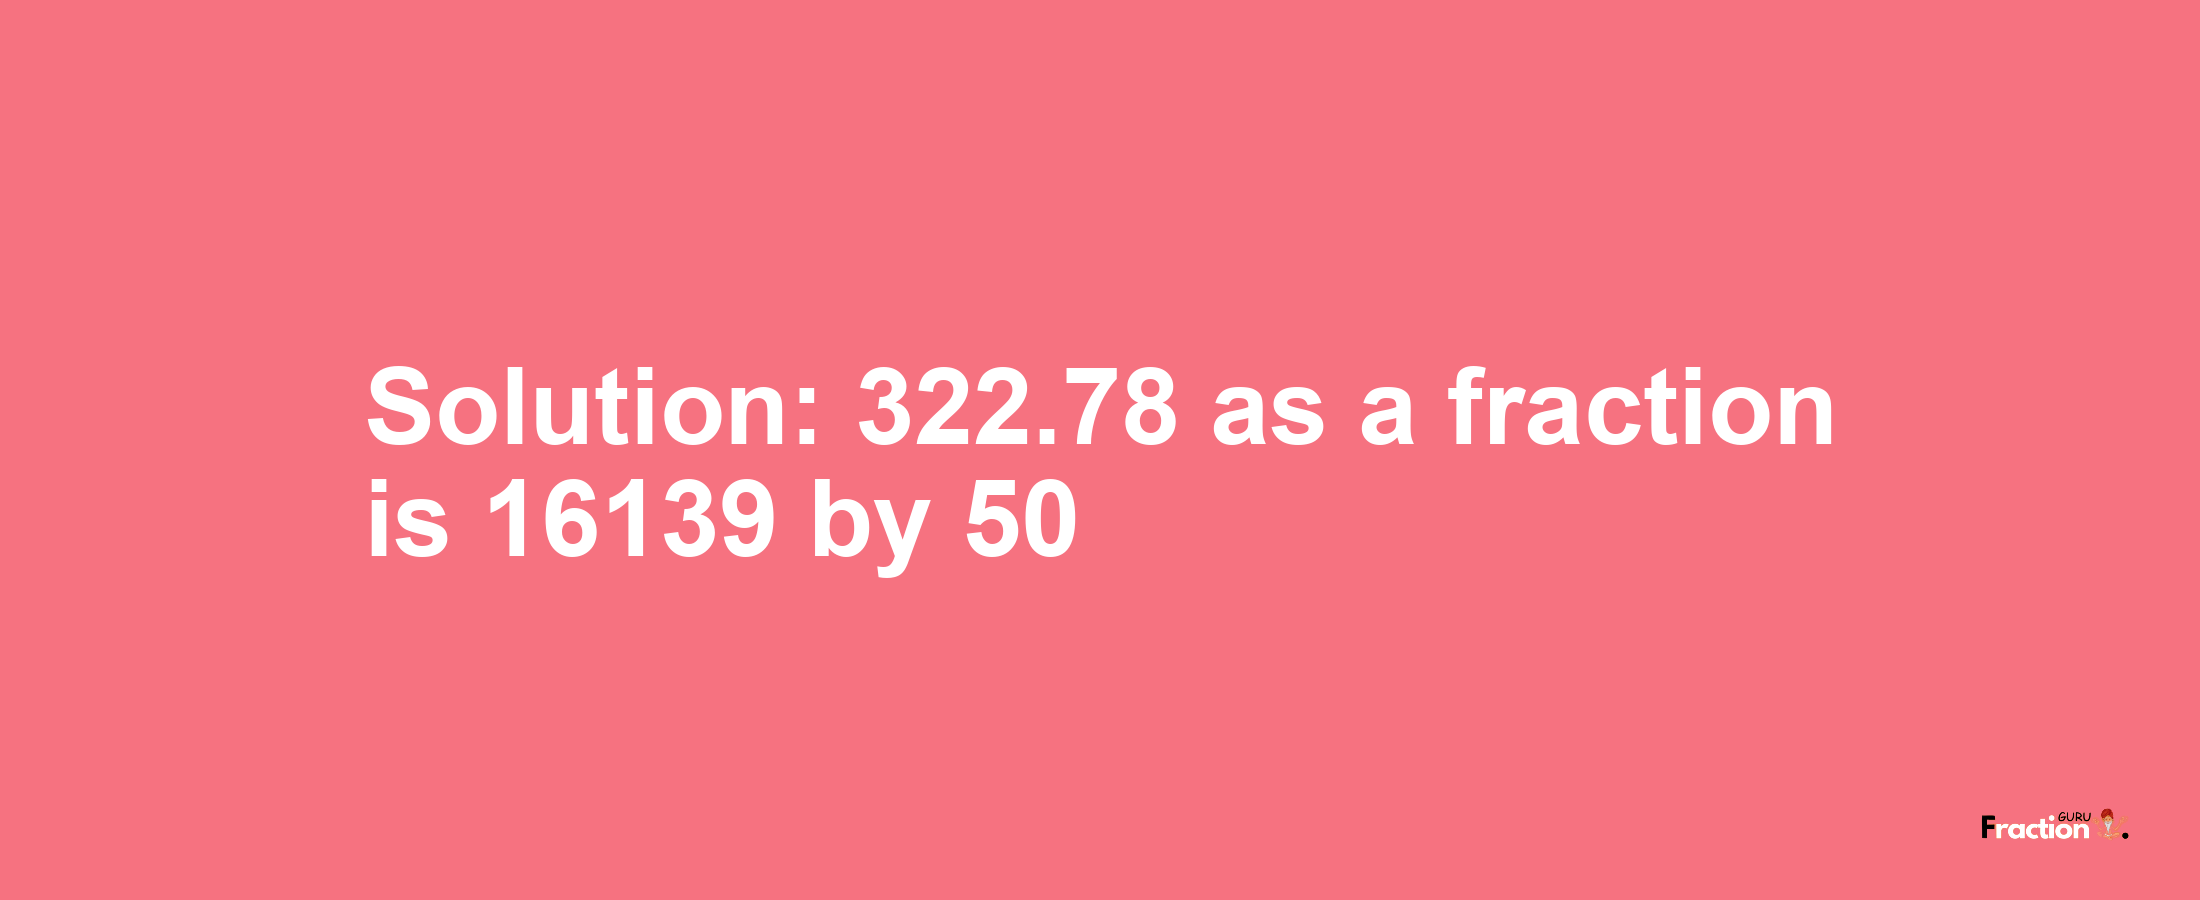 Solution:322.78 as a fraction is 16139/50